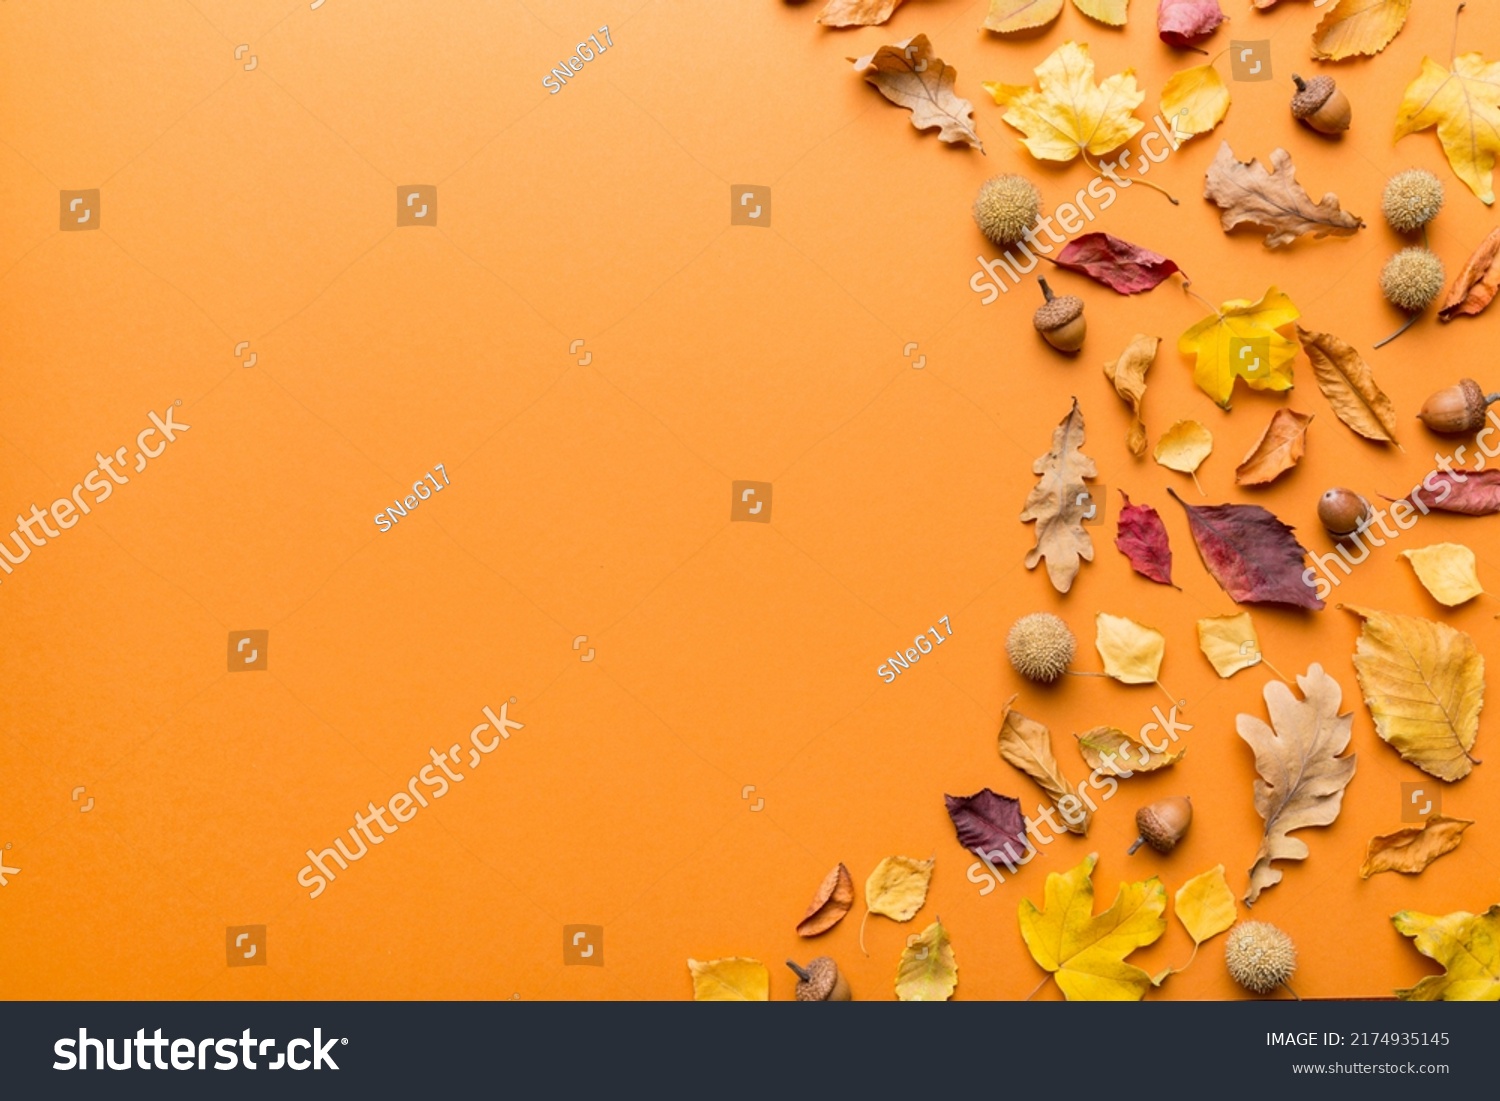 Autumn composition. Pattern made of dried leaves and other design accessories on table. Flat lay, top view. #2174935145